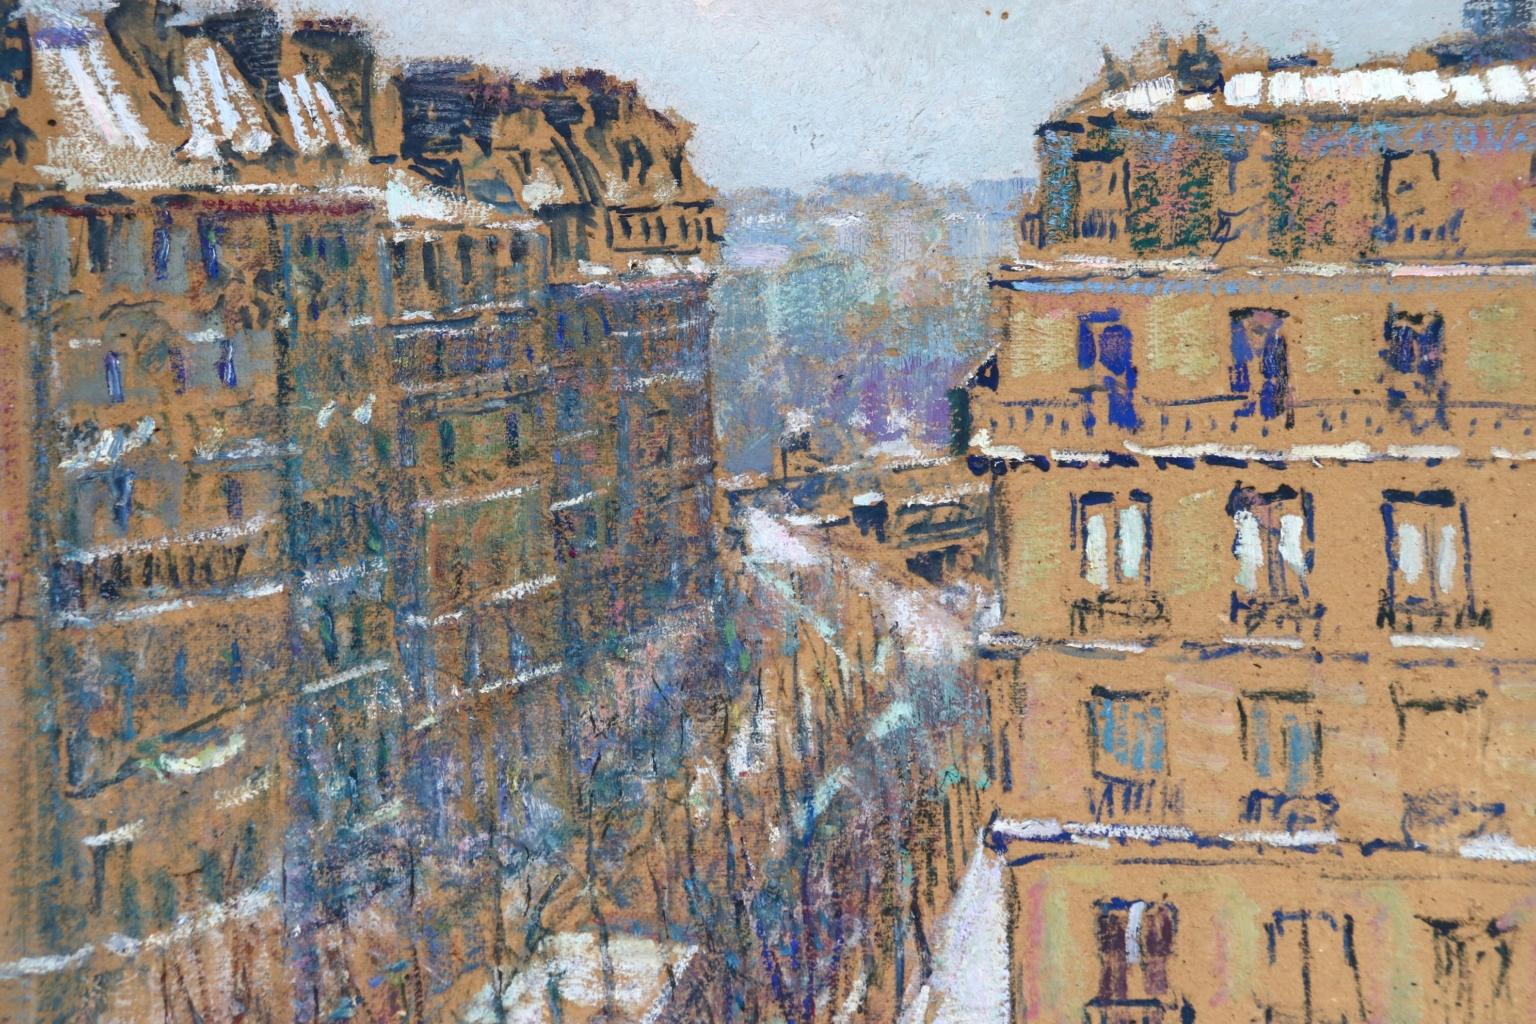 A wonderful oil on board by popular French post impressionist painter Victor Charreton depicting a view of the Boulevard de Clichy in winter. The street and buildings dusted with white snow and the trees that line the street are bare.